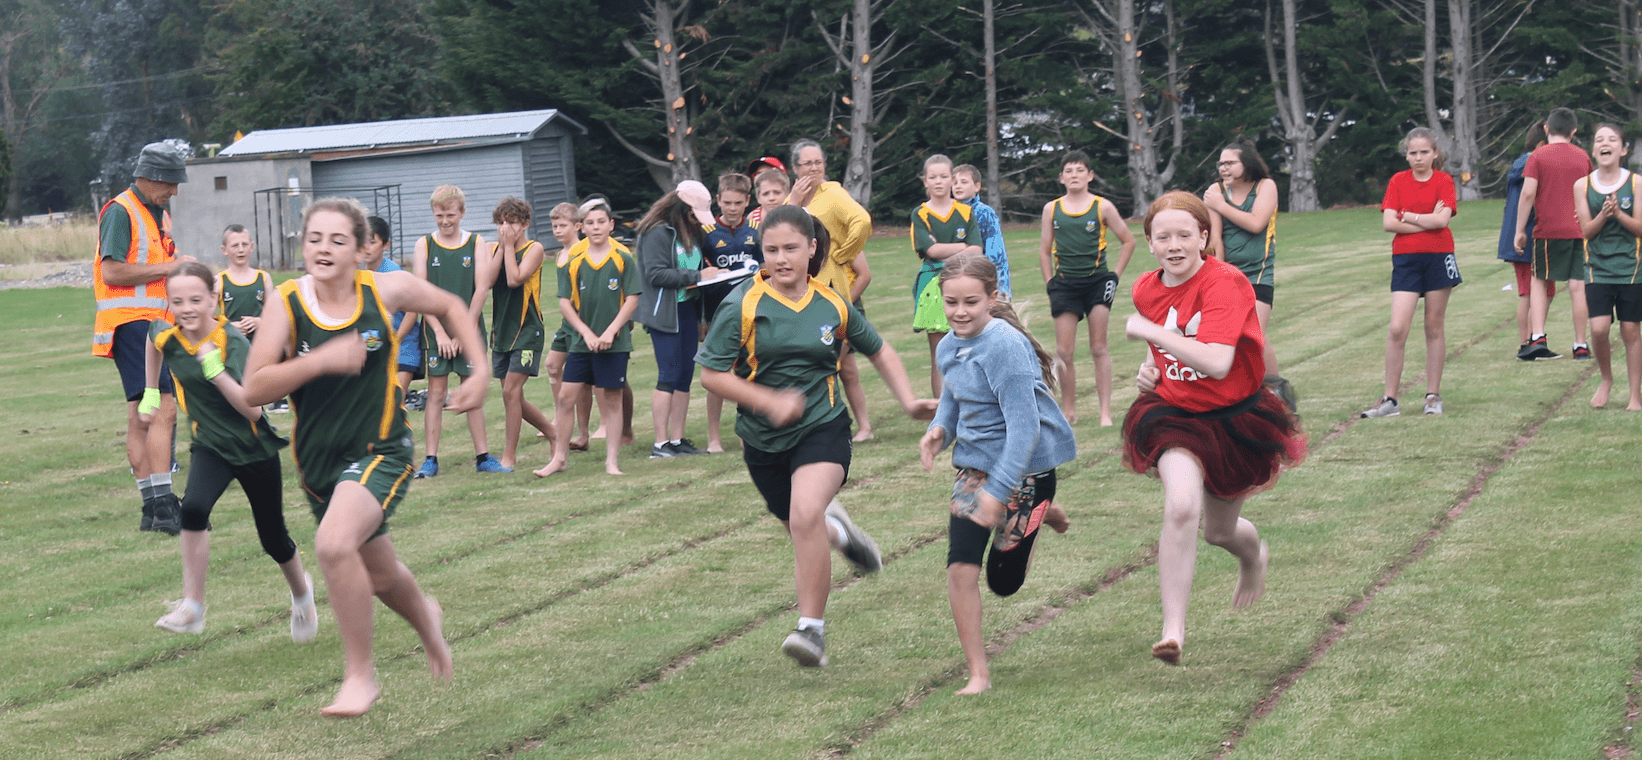 Students running a race